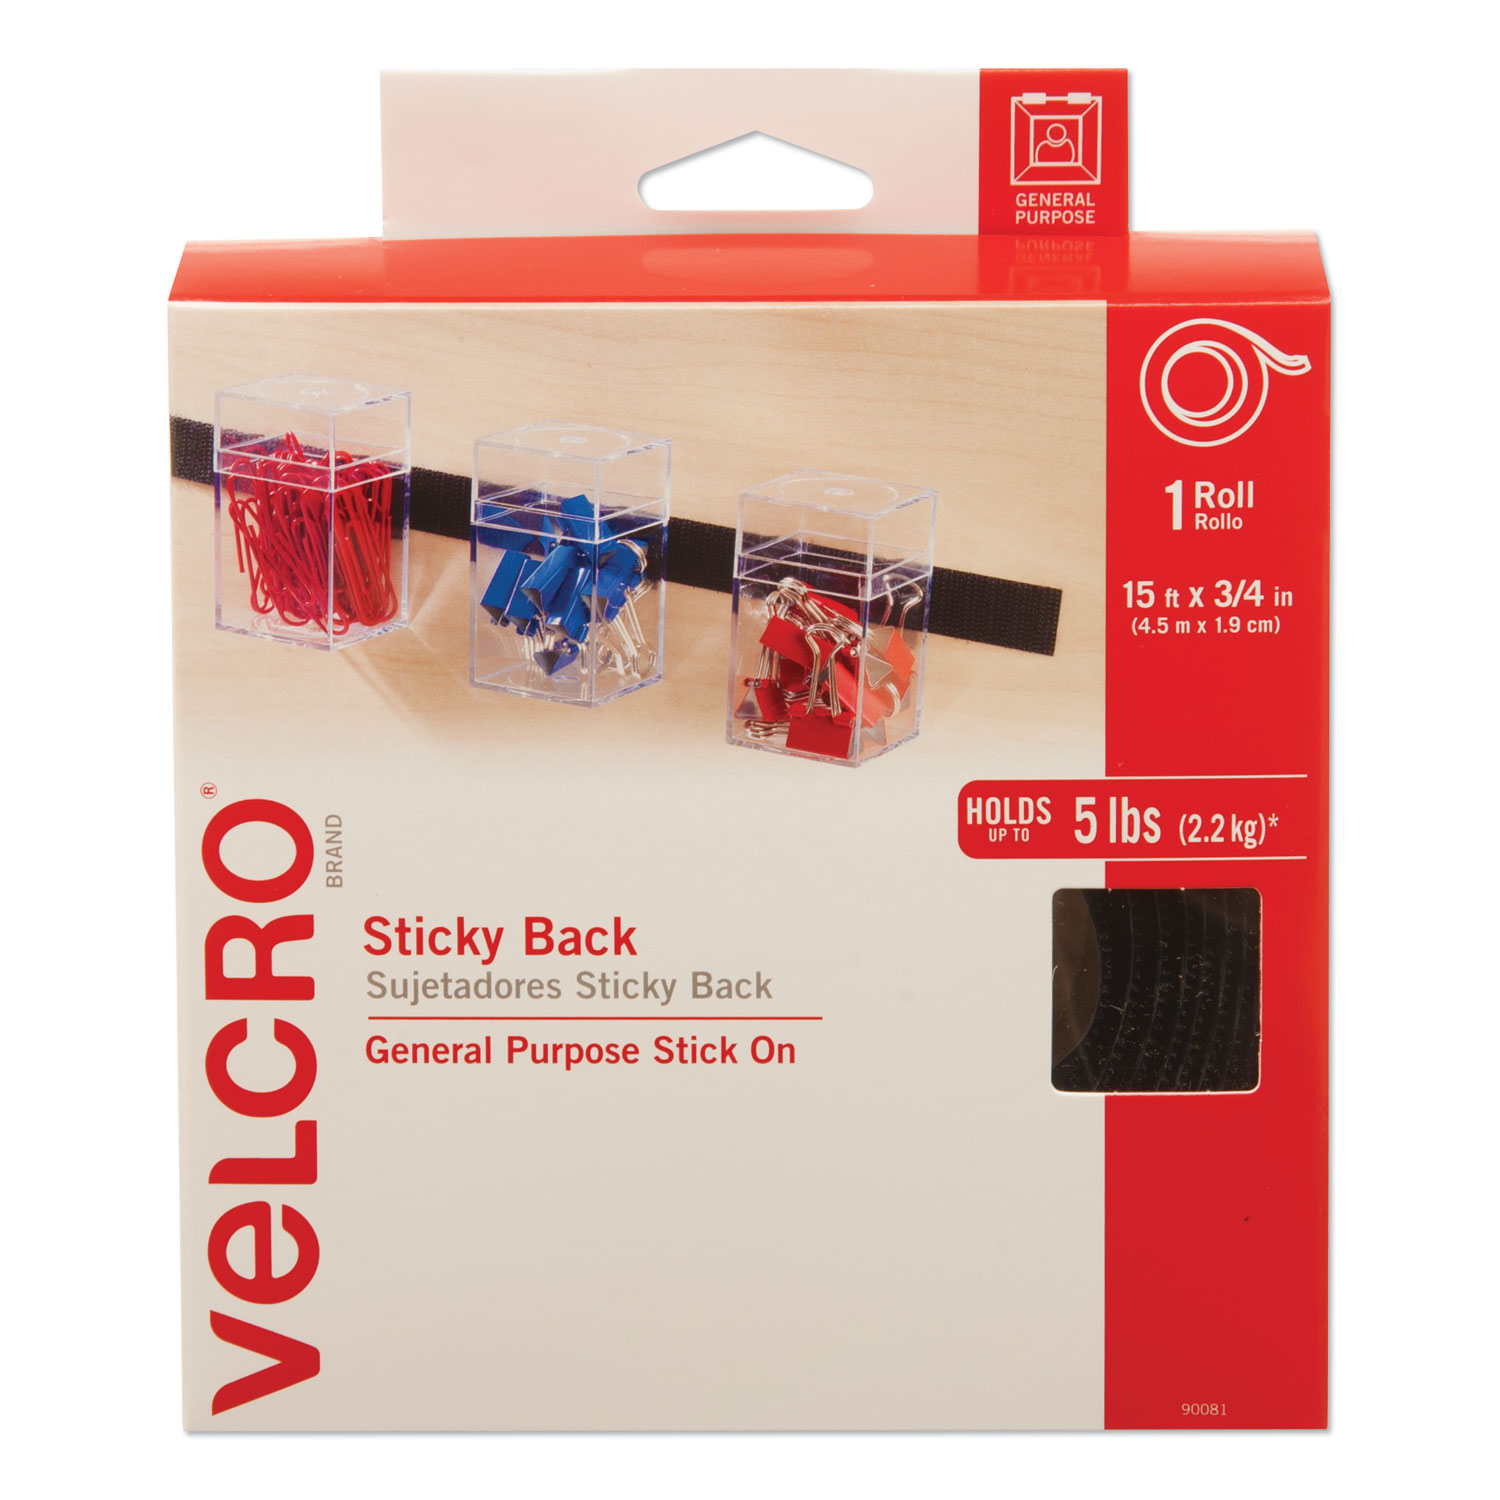  VELCRO Brand 90081 Sticky-Back Fasteners with Dispenser, Removable Adhesive, 0.75 x 15 ft, Black (VEK90081) 